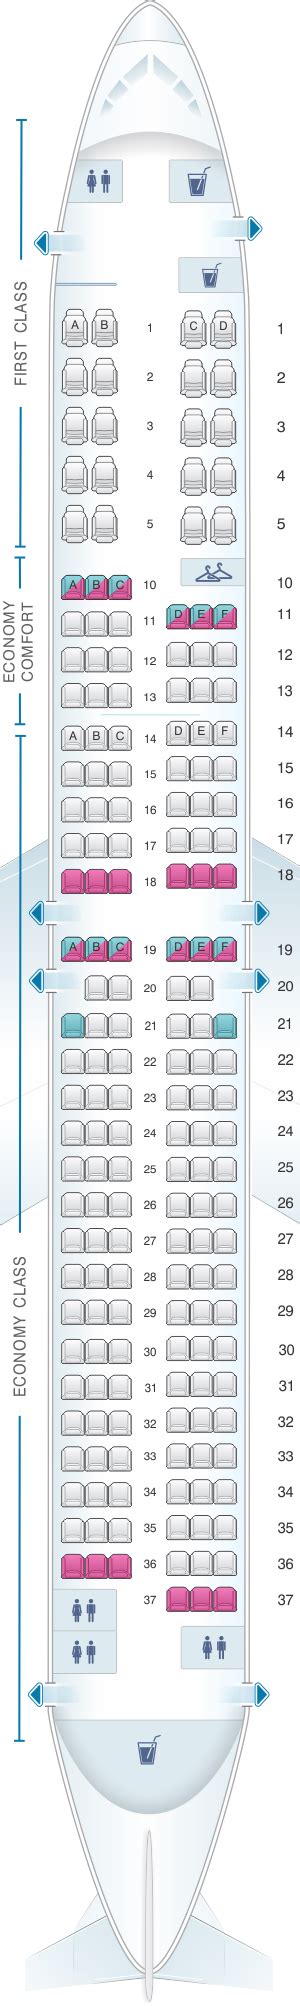 delta airlines boeing 737 900 seating chart